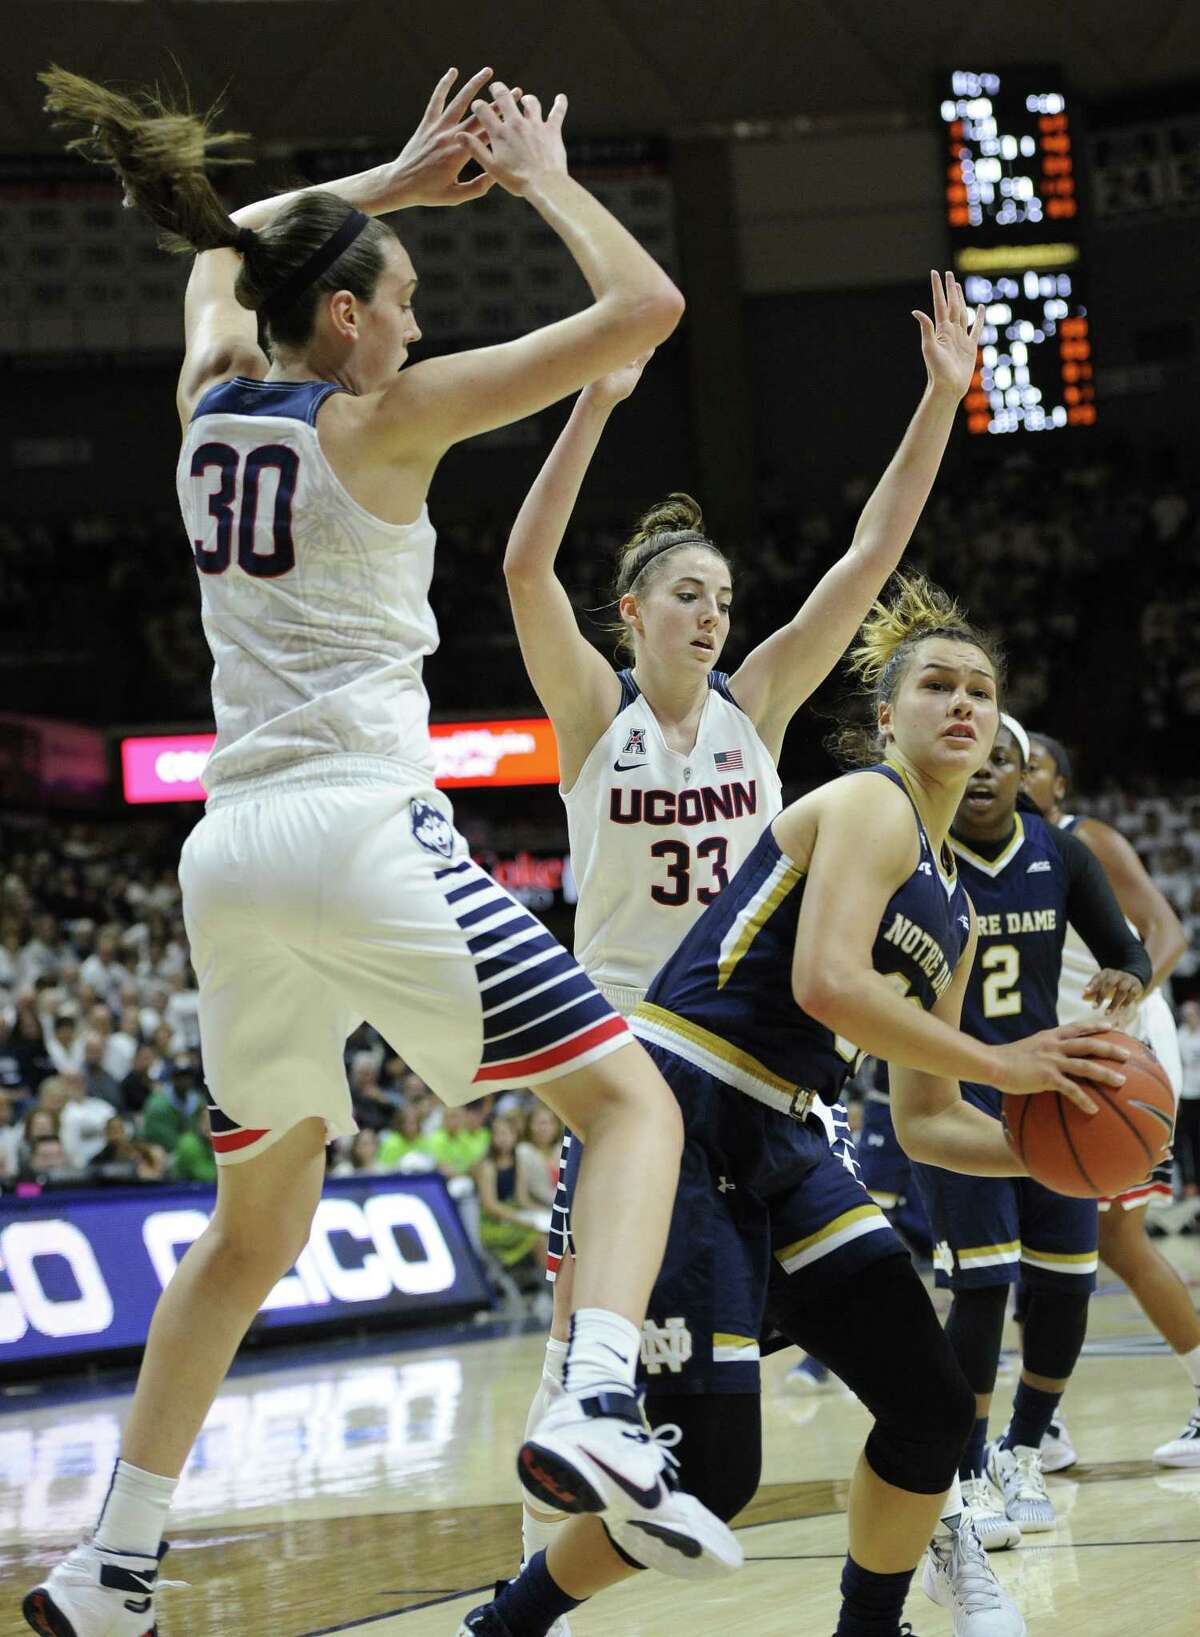 UConn’s Breanna Stewart, left, and Katie Lou Samuelson, center, guard Notre Dame’s Kathryn Westbeld during Saturday’s game.